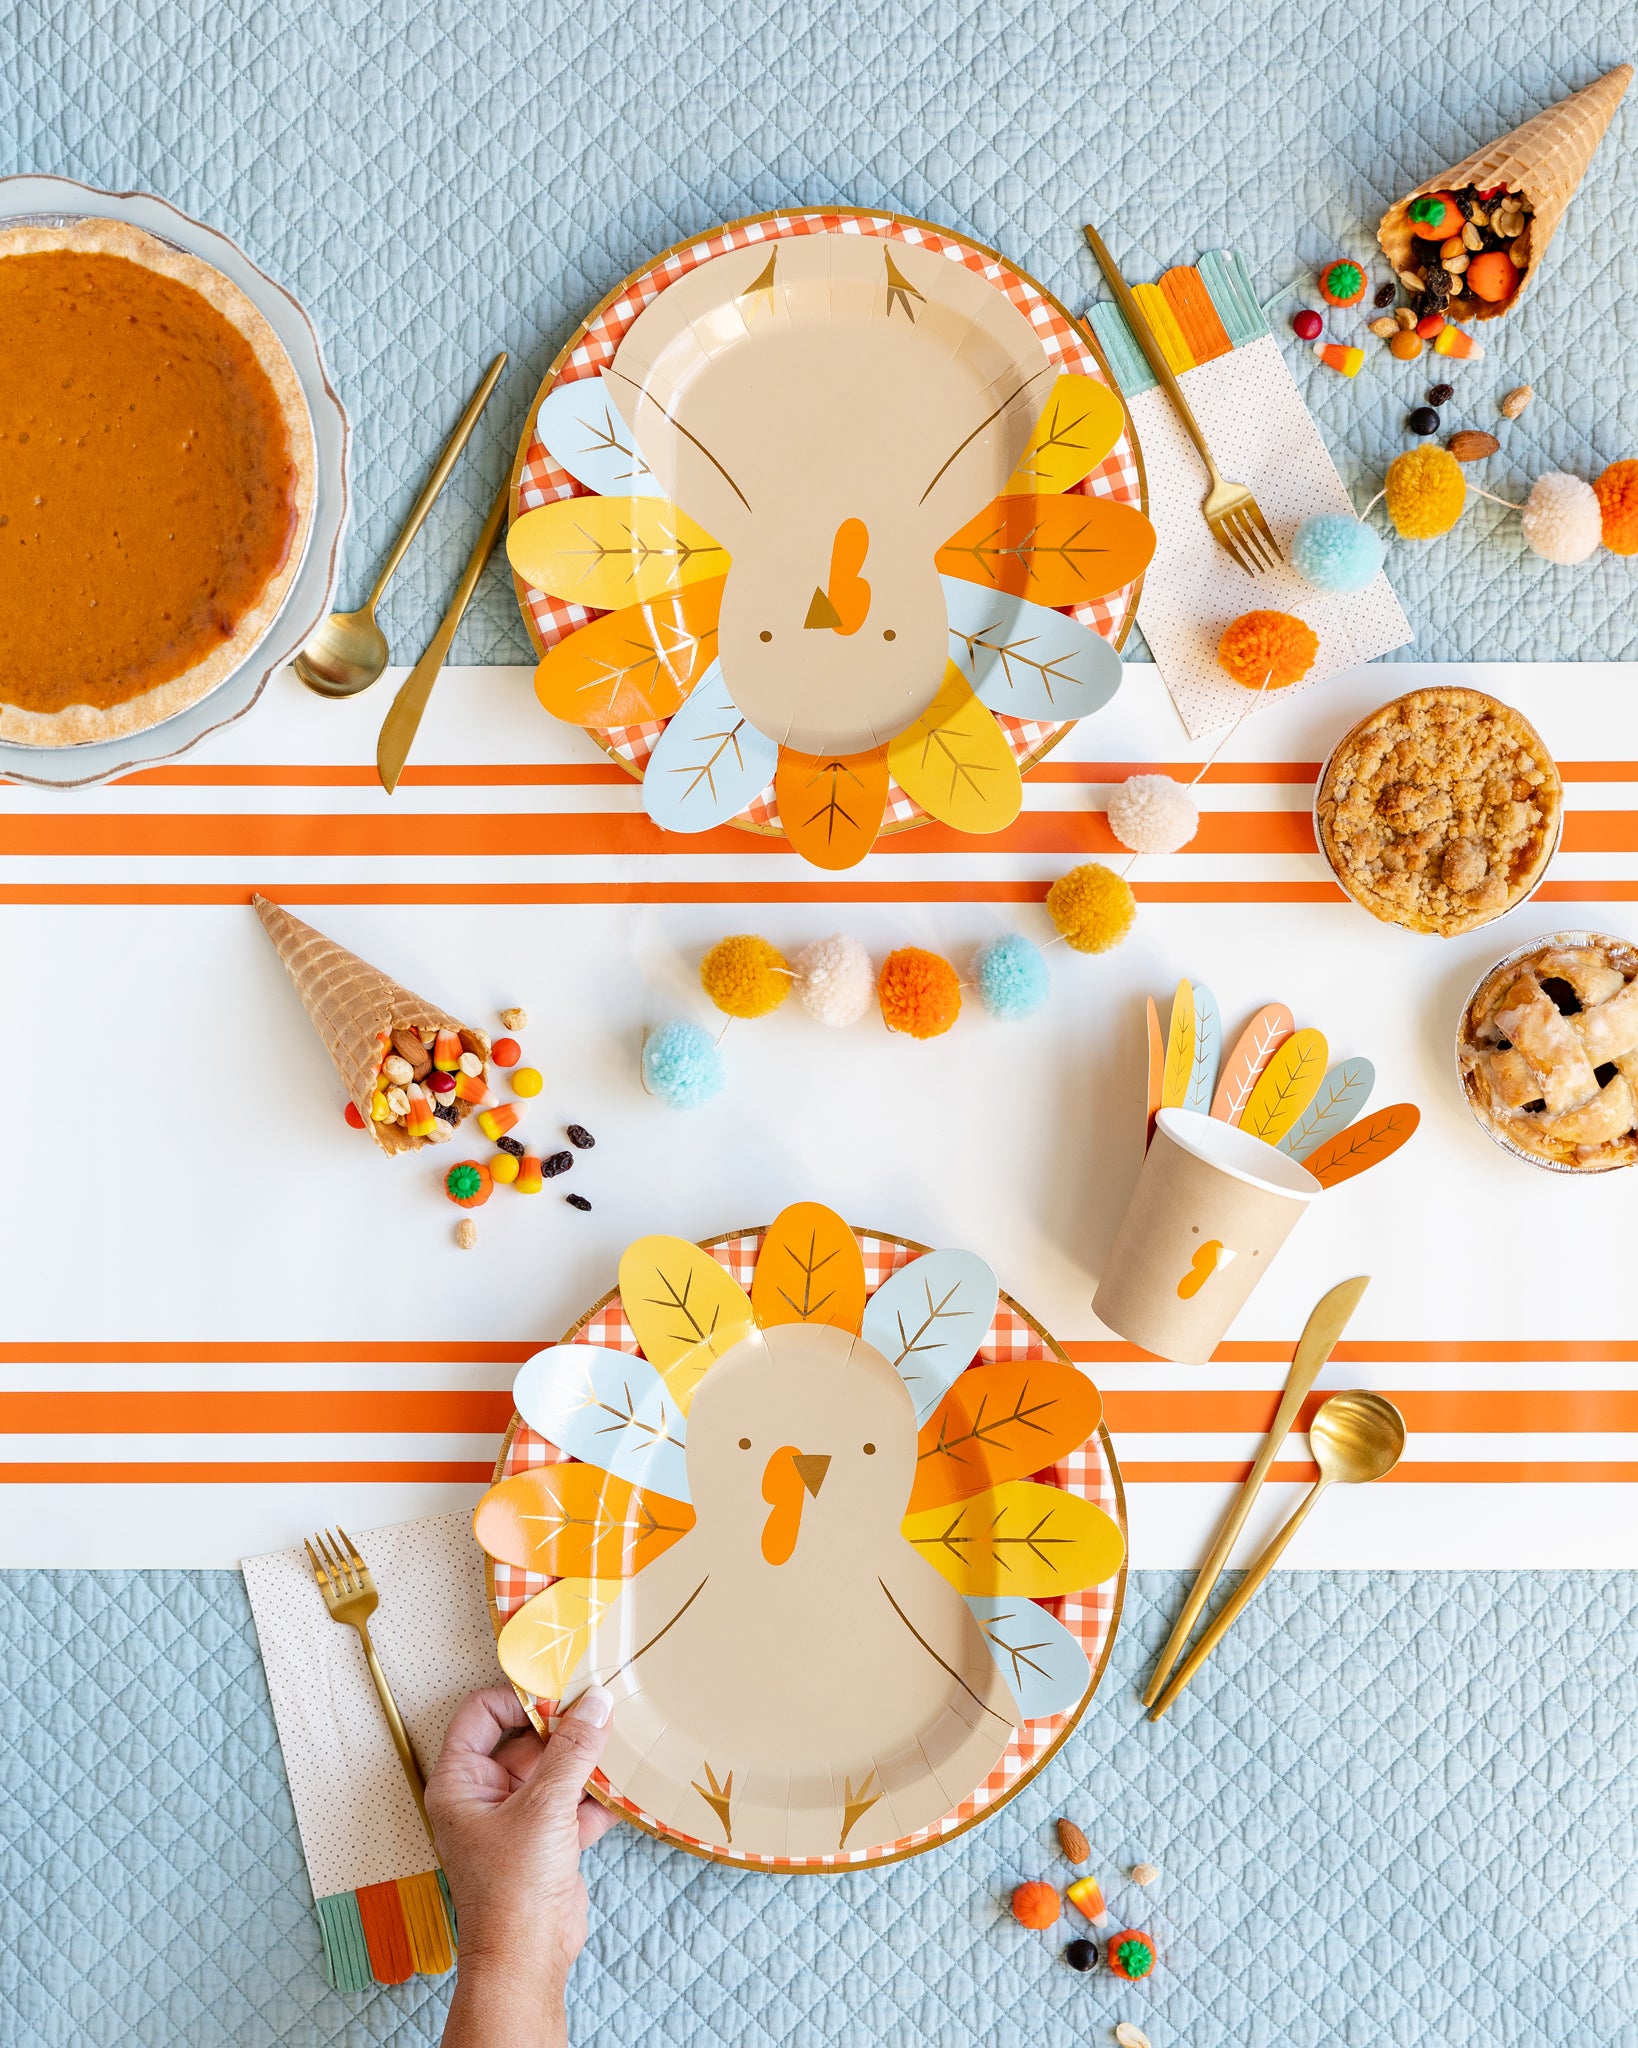 Orange Striped Paper Table Runner | The Party Darling 